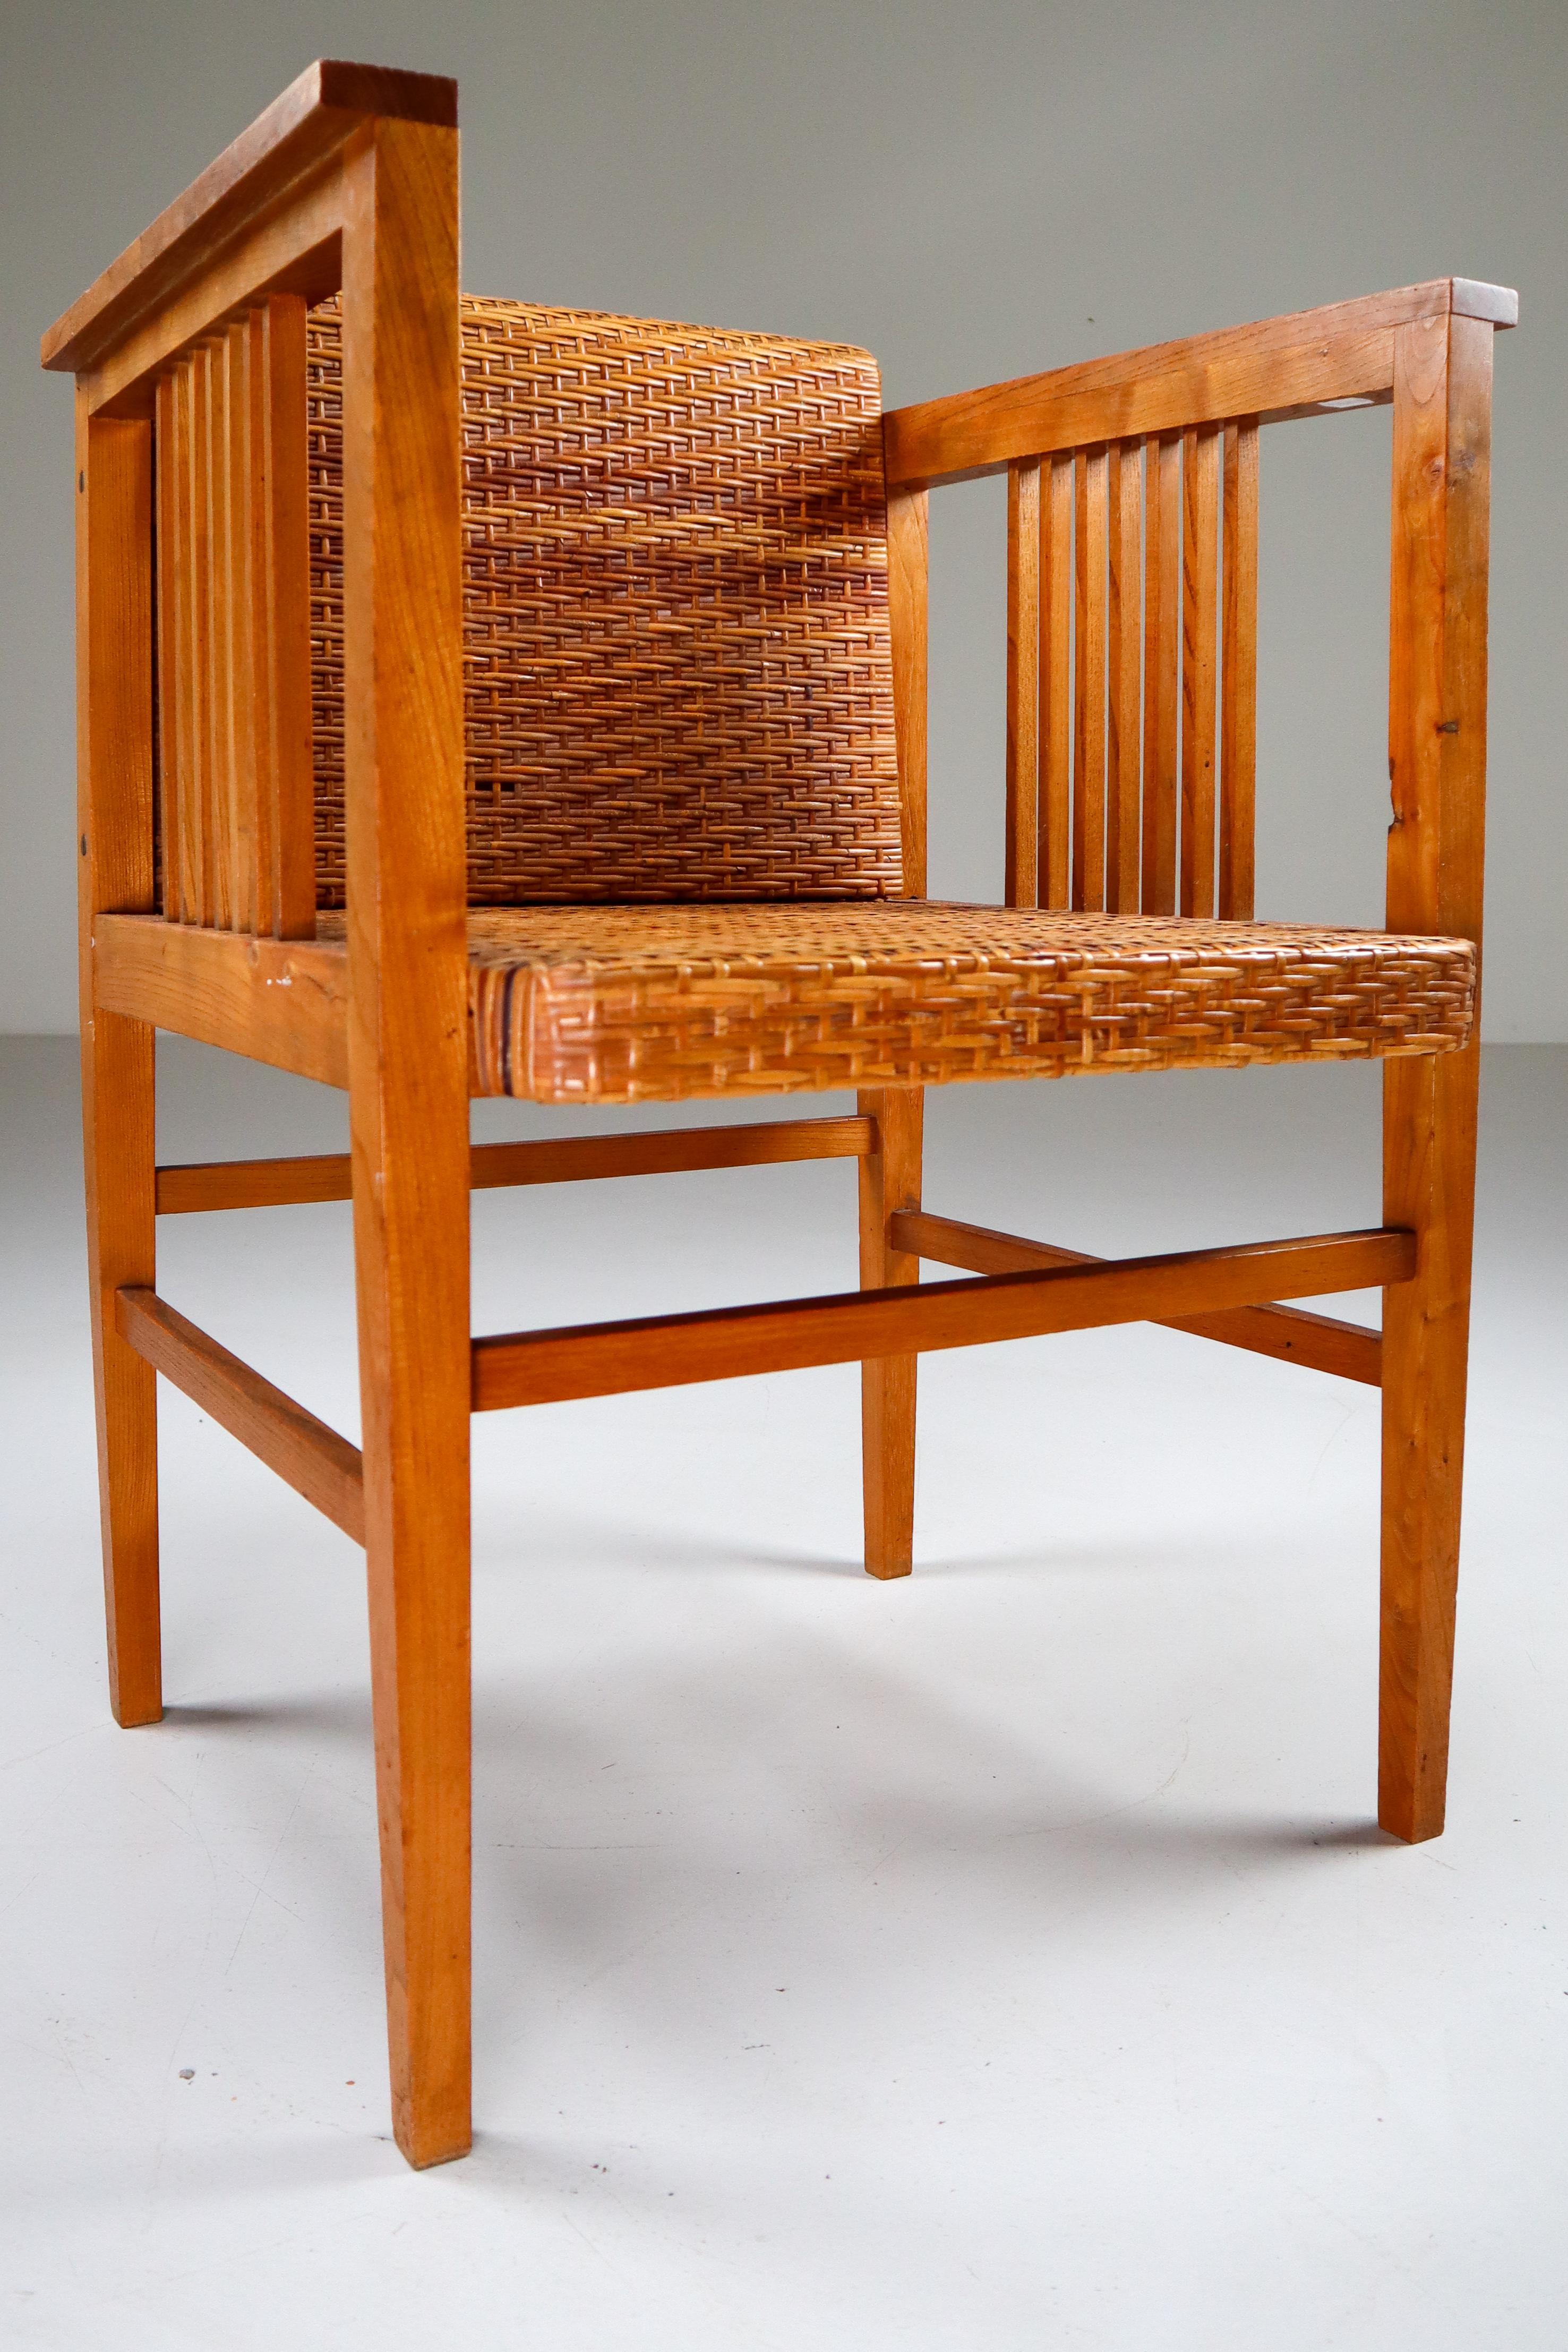 Set of 4 armchairs in elm and cane which were designed by Hans Vollmer made in Vienna, 1905-1910. Model 1/567 is executed by Prag - Rudniker Korbwaren Fabrication. Prag-Rudniker Korbwaren Fabrication decided during the turn to the 20th century to